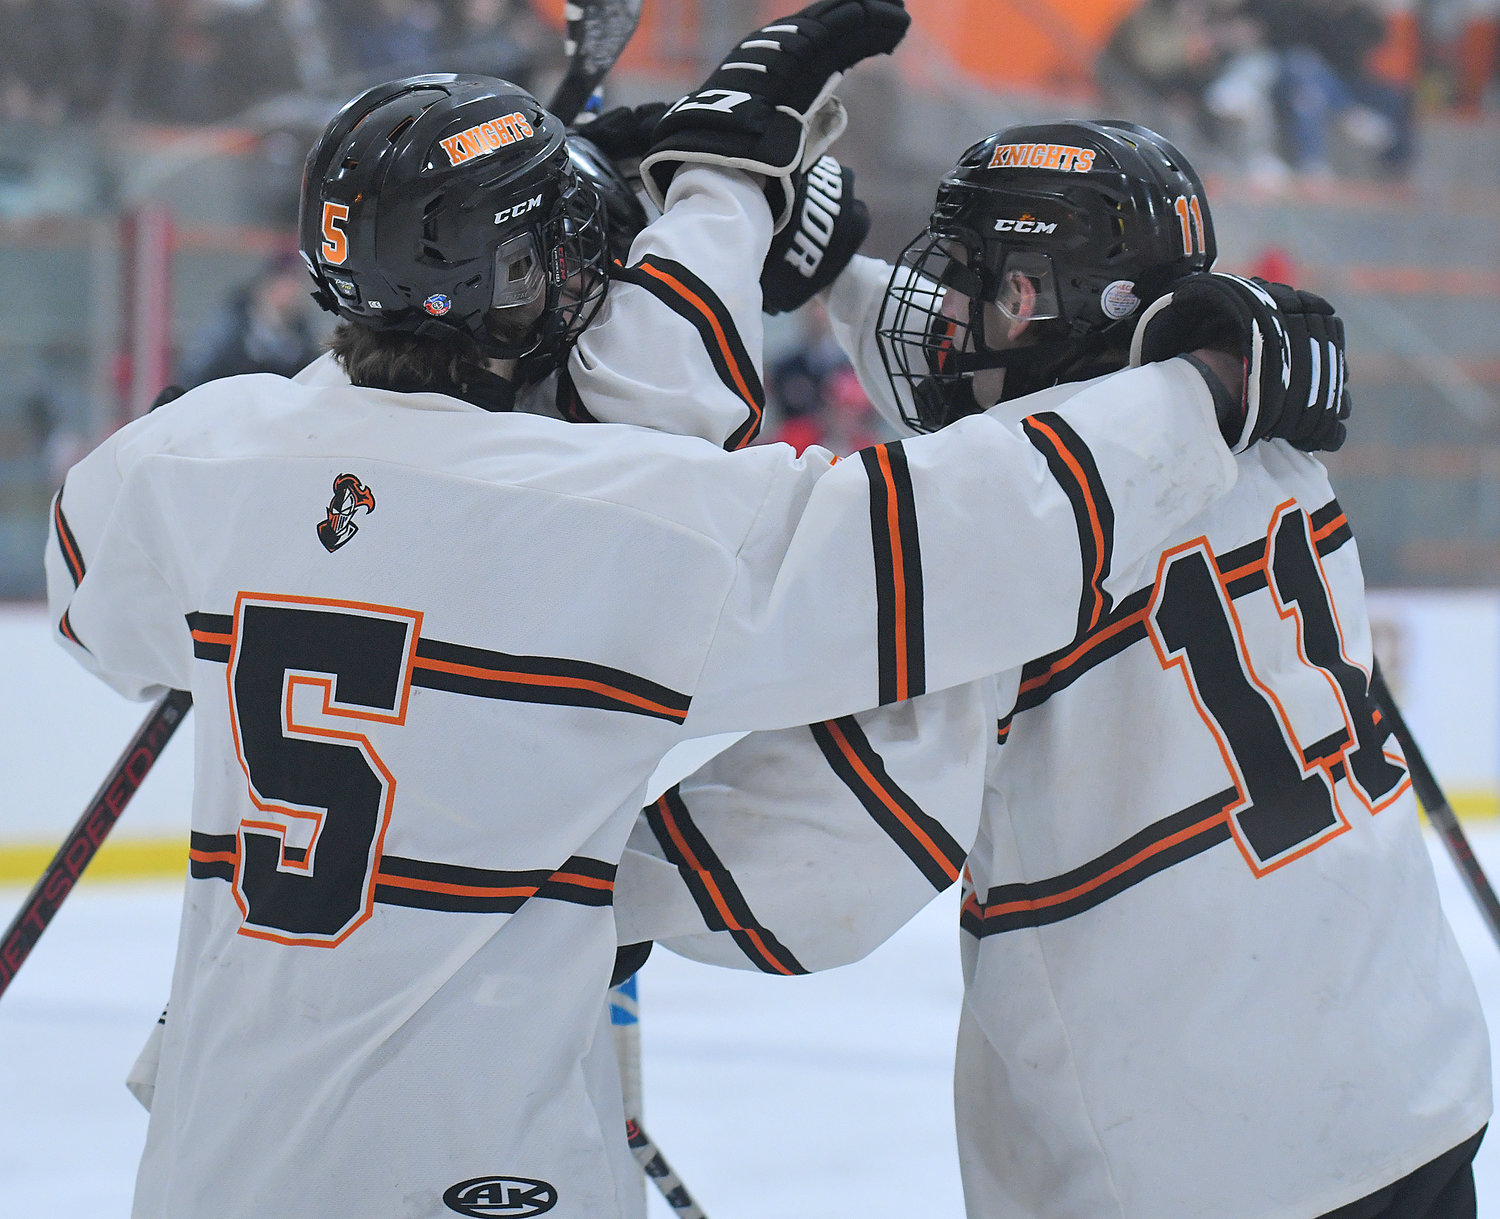 Rome Free Academy players Chris Brement, left, and John Sharrino celebrate Sharrino's goal in the first period Friday afternoon at Kennedy Arena. Sharrino had a hat trick and two assists and Brement also scored in the team's 10-0 win.